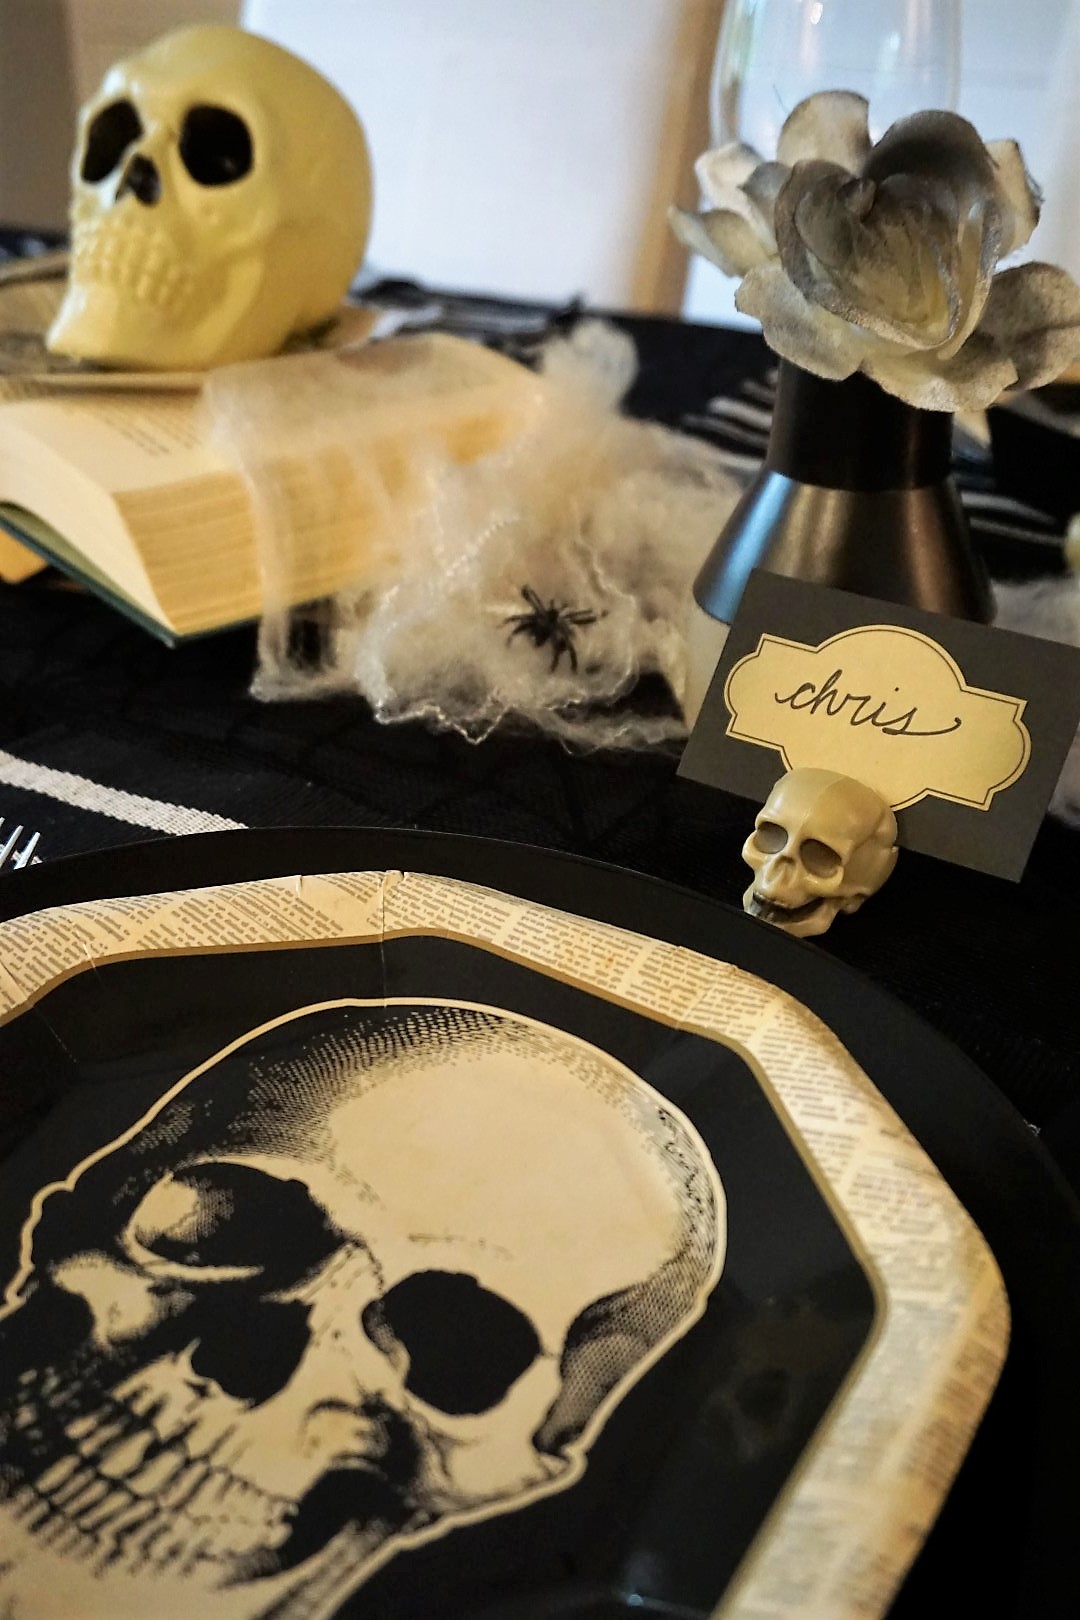  This year I was loving the vintage skull vibes! Click here to learn how to recreate this Halloween tablescape on a budget! | Legally Crafty #halloweendiy #halloweentable #halloweentablescape #halloweendiy 